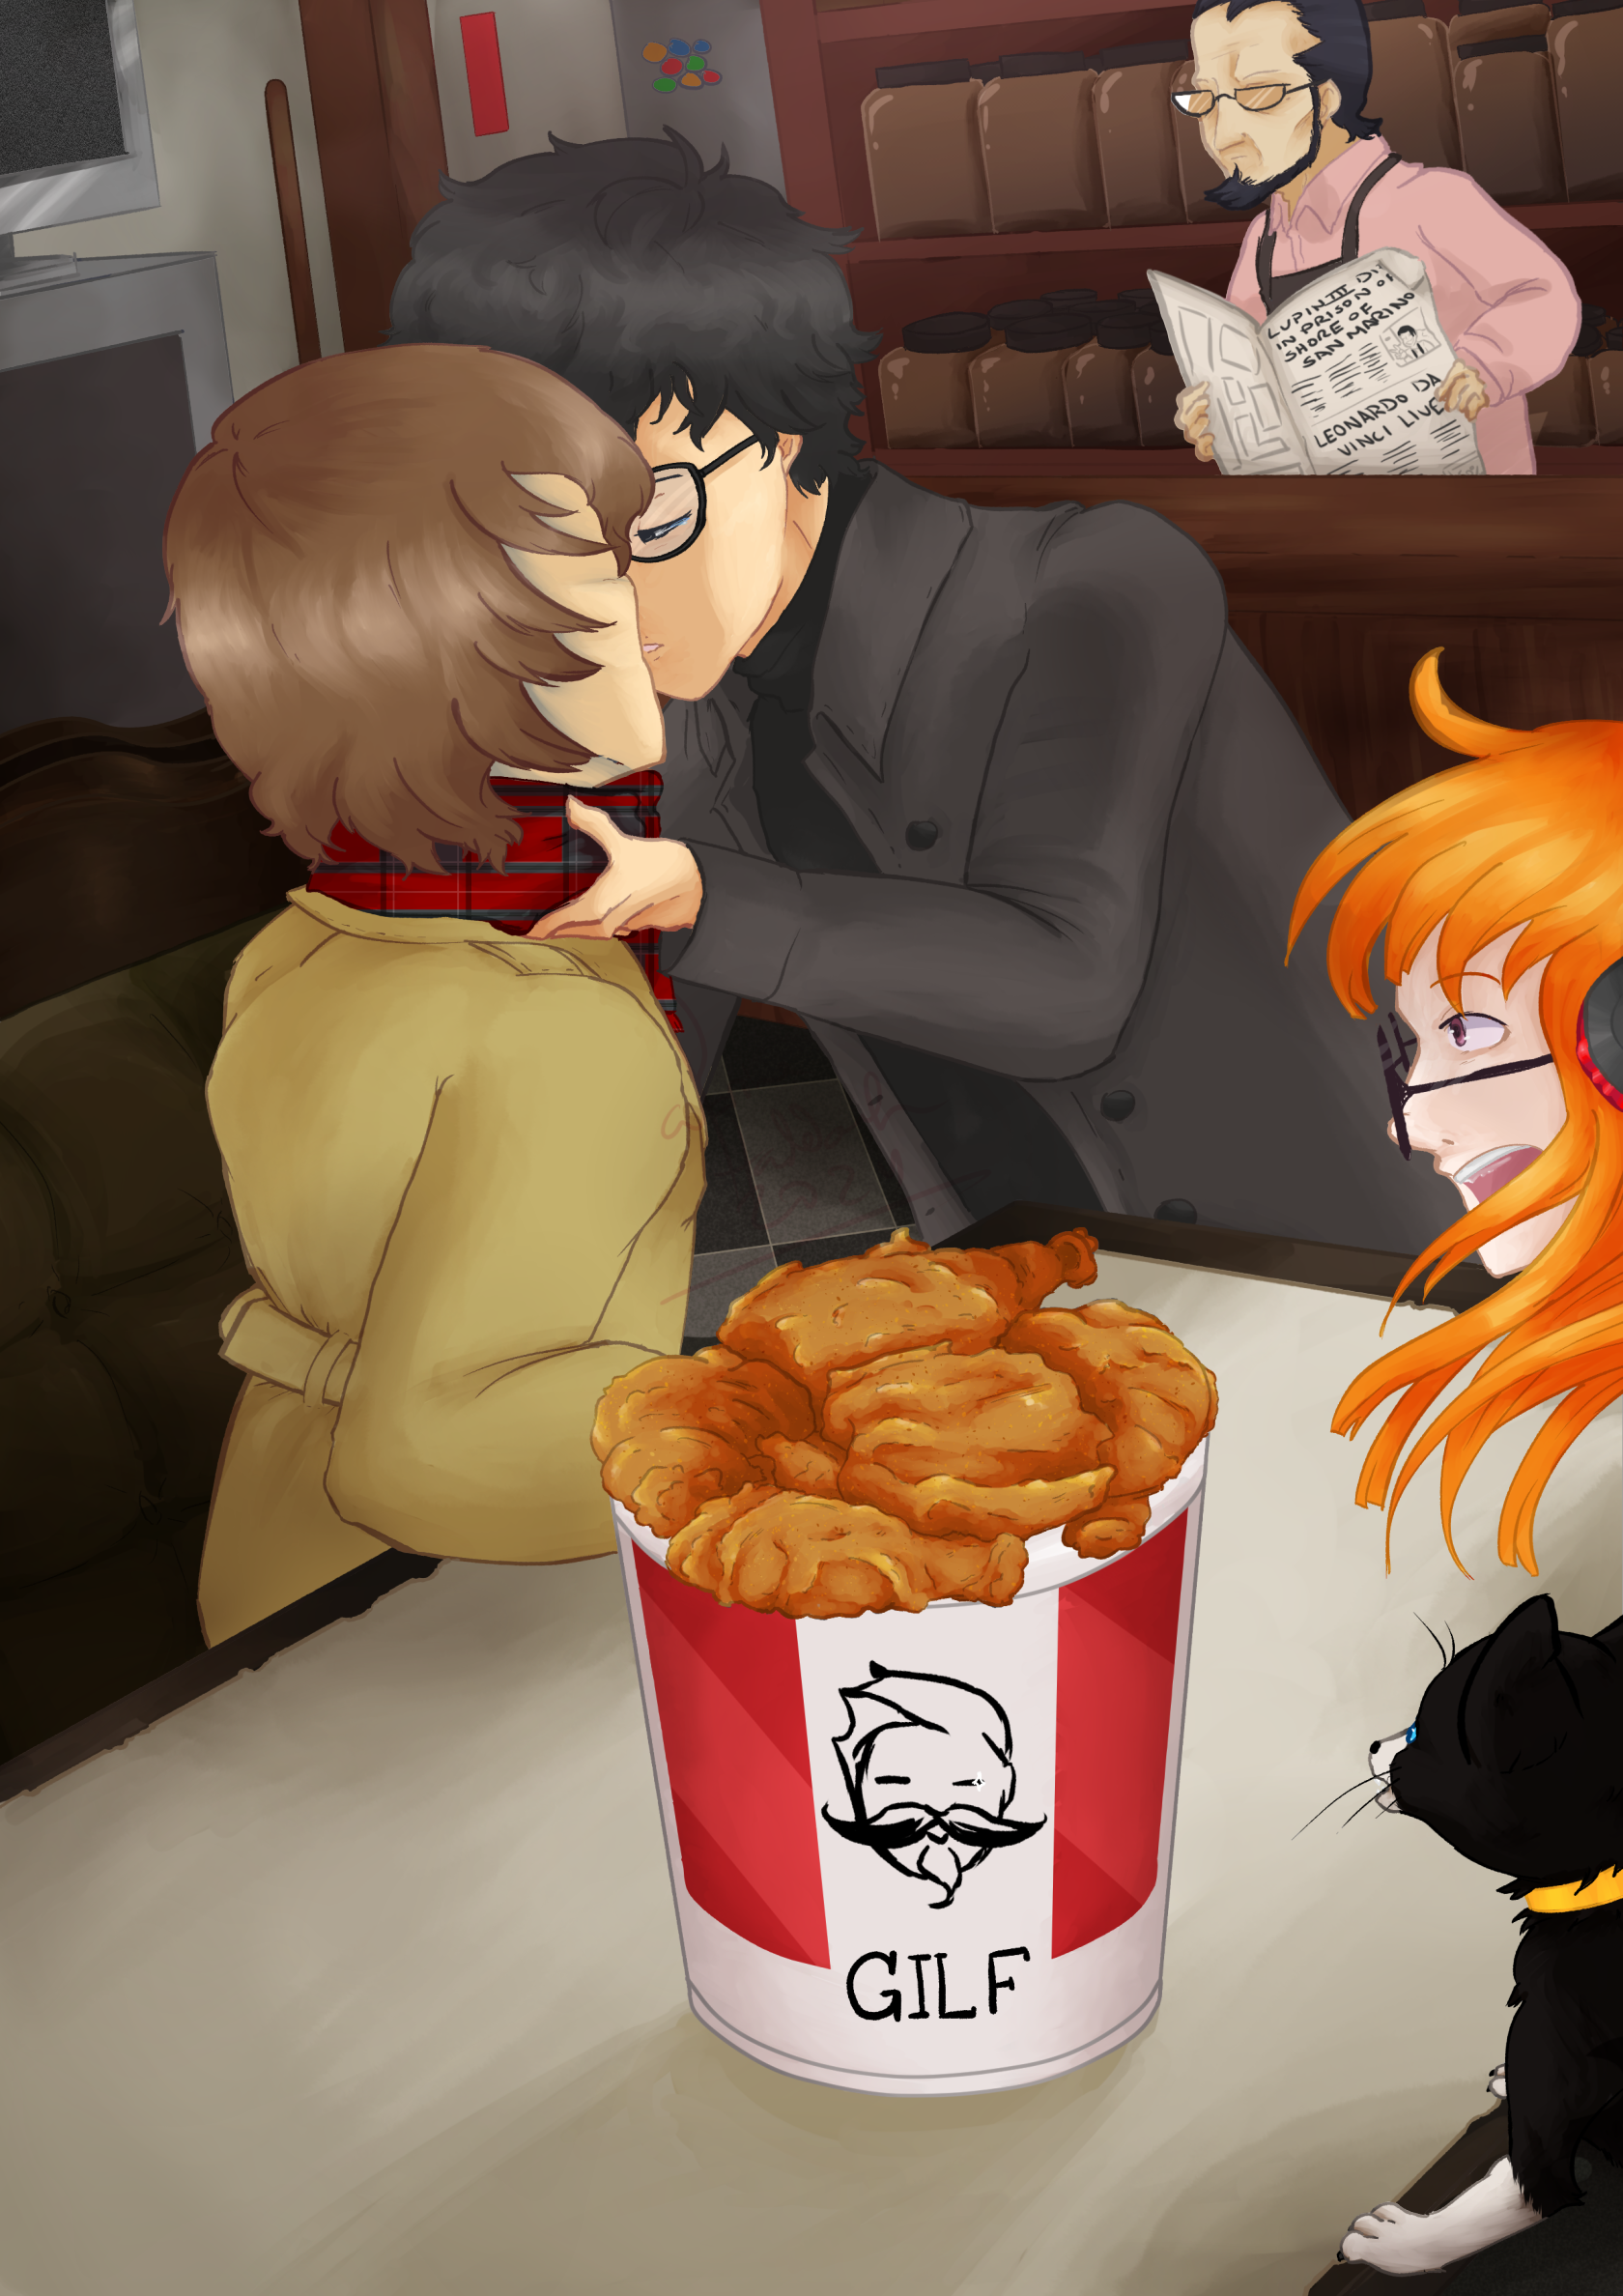 Goro and Joker kissing at a booth in LeBlanc, Morgana and Futaba sitting across from them looking shocked.  There's a bucket of GILF fried chicken on the table and Sojiro is at the counter in the back reading a newspaper.